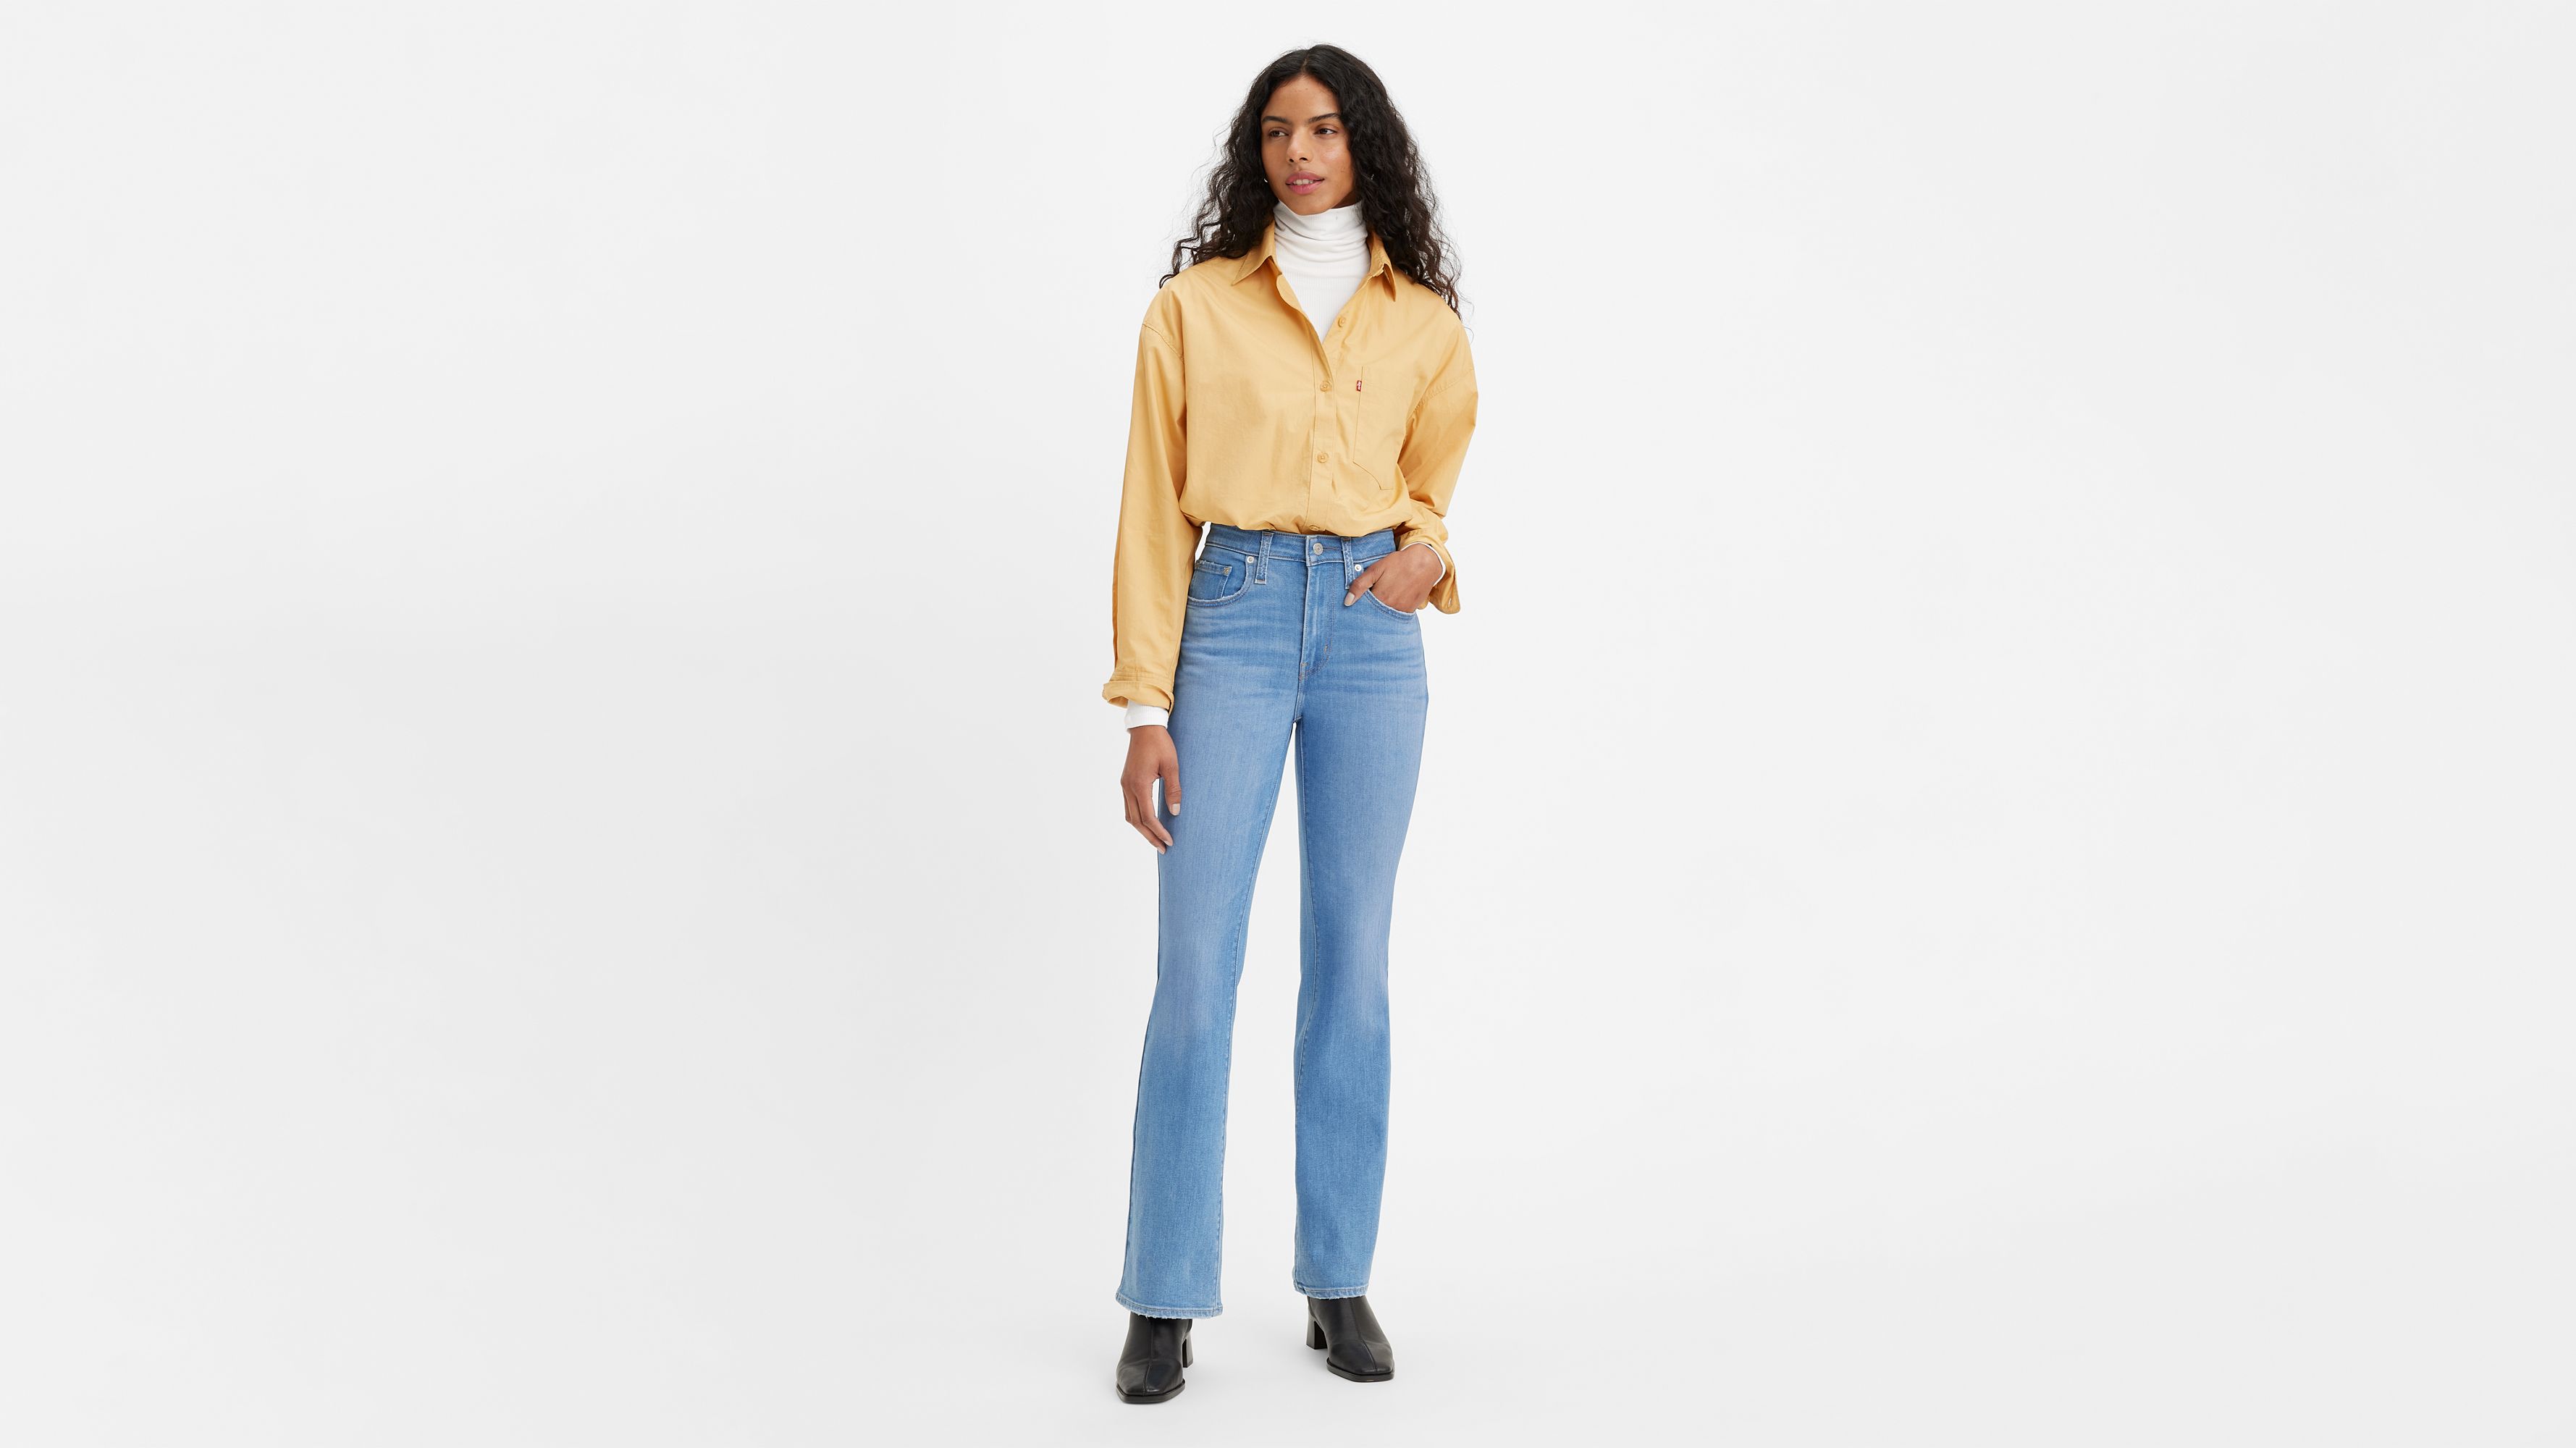 Levi's A3410-0025 725 High Rise Flare Jeans in Light of My Life - Light Wash